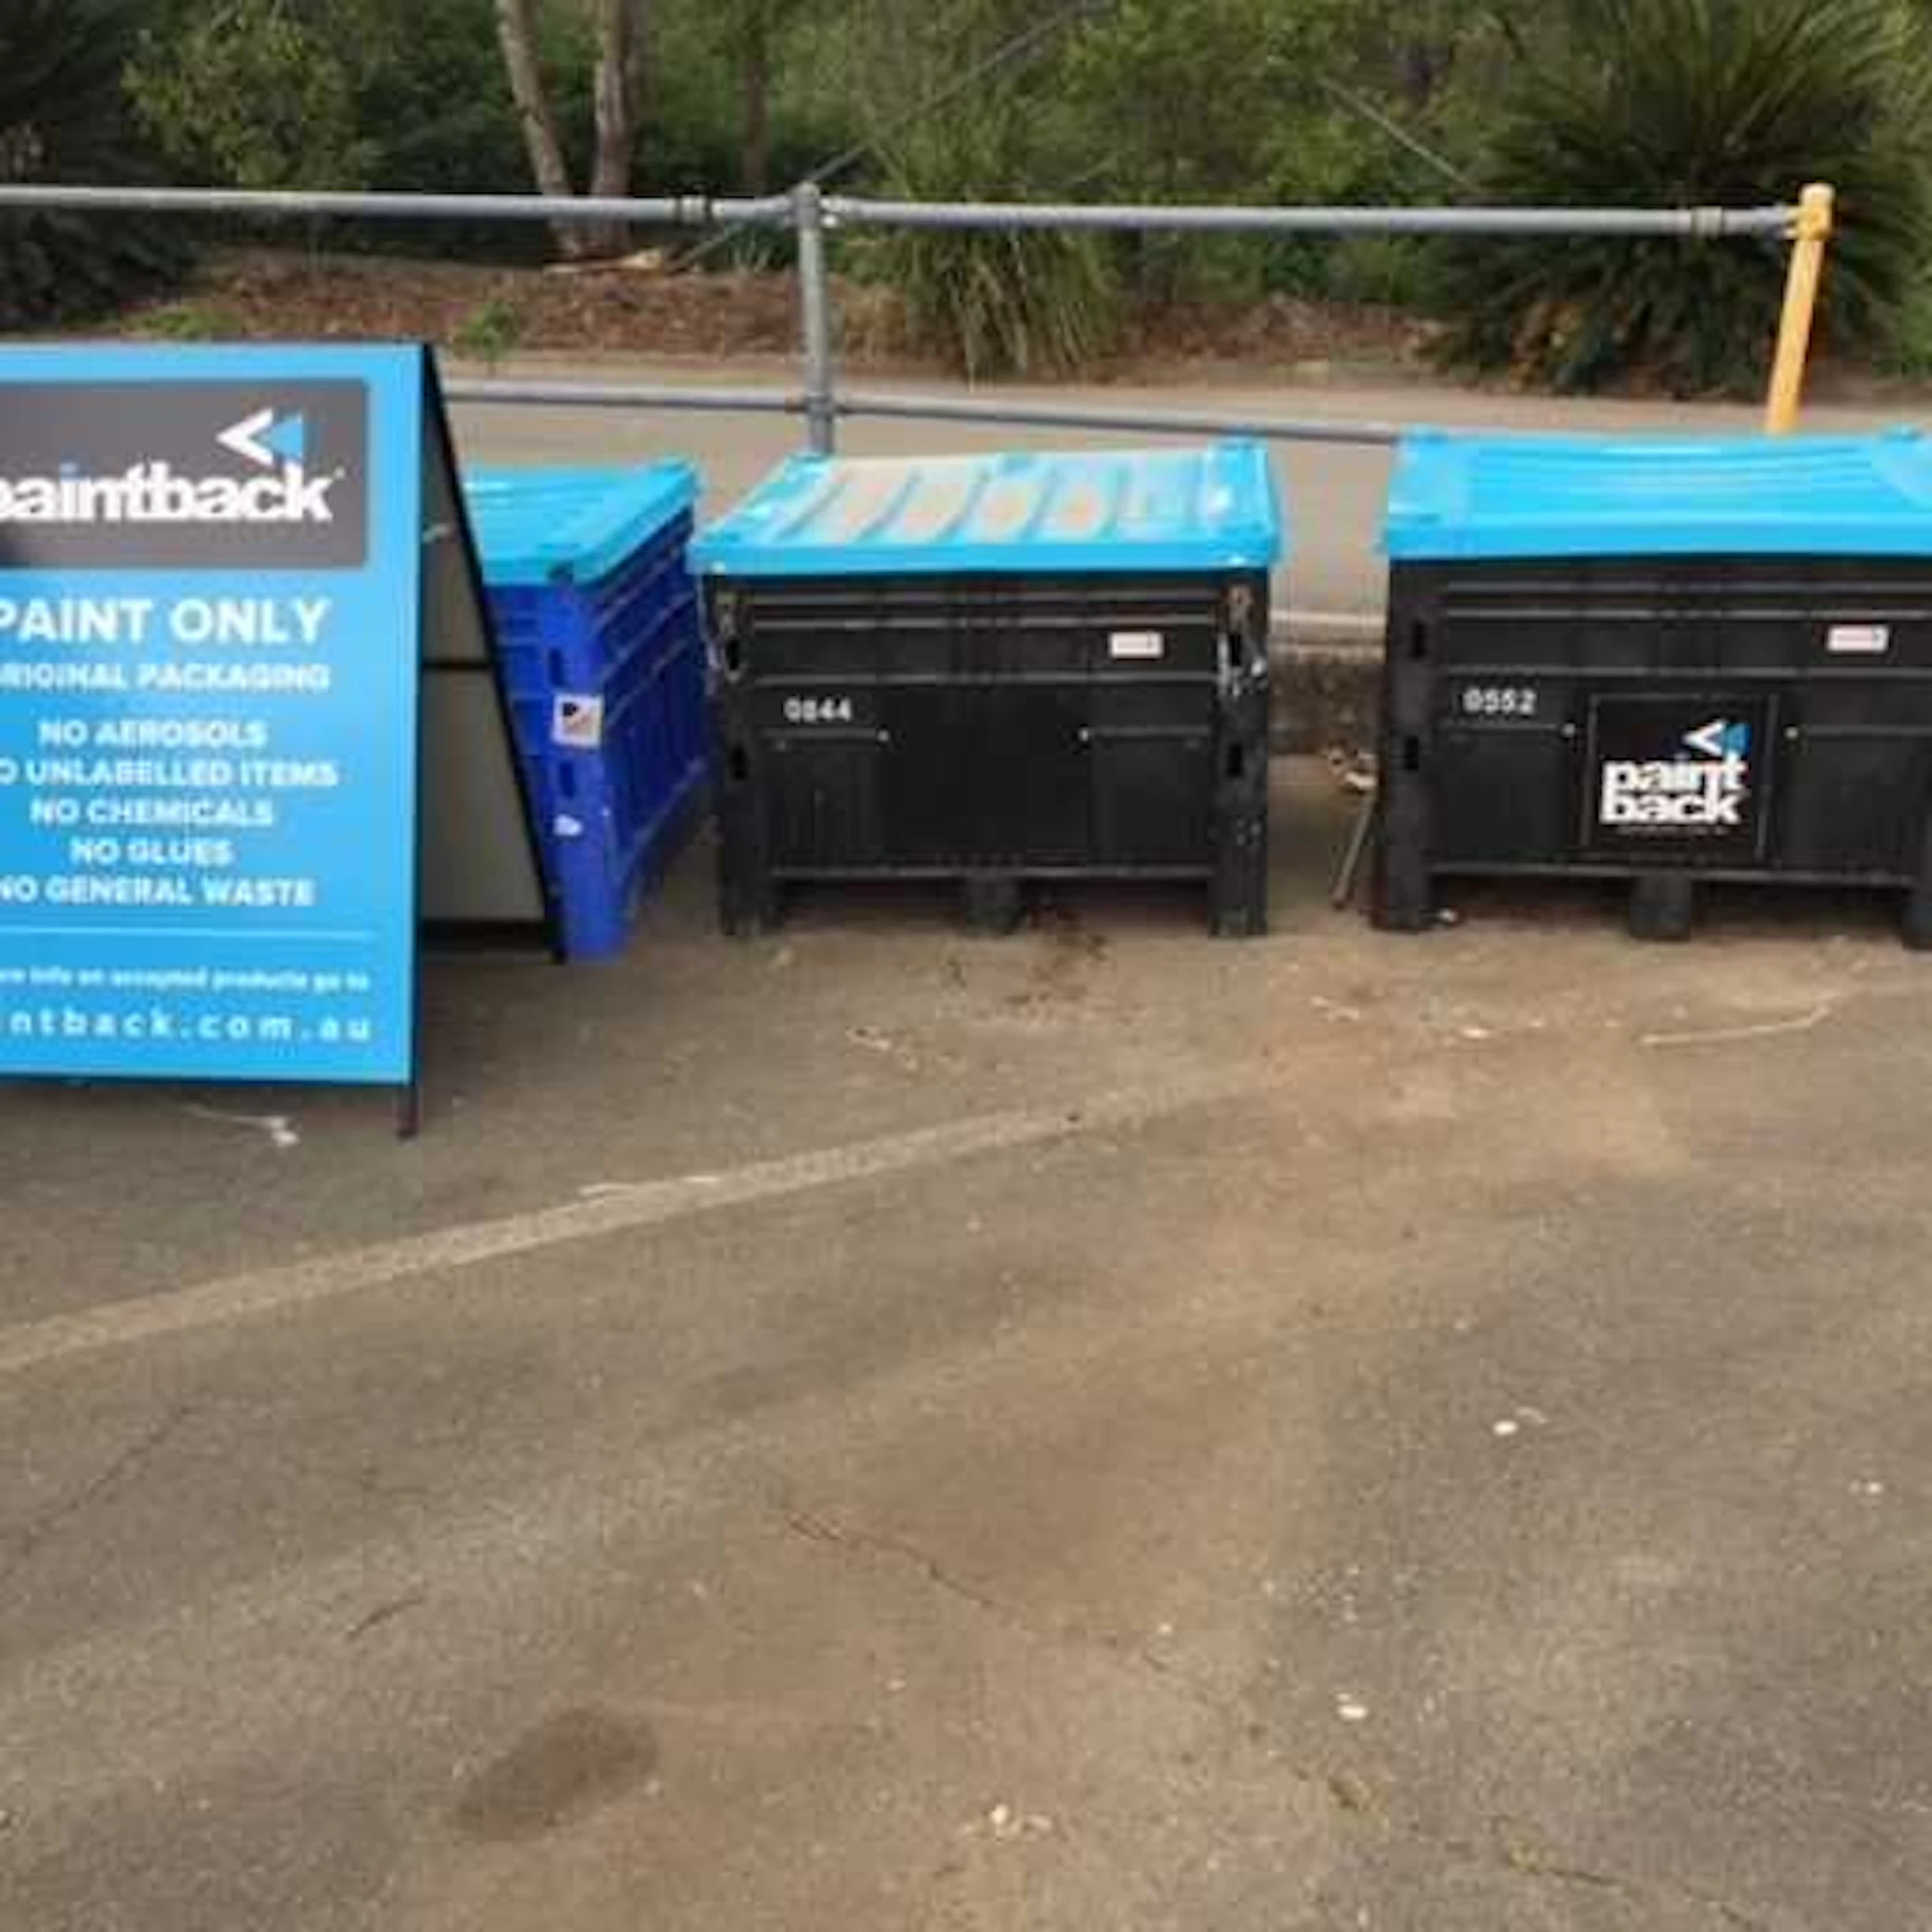 Paintback recycling bins and sign